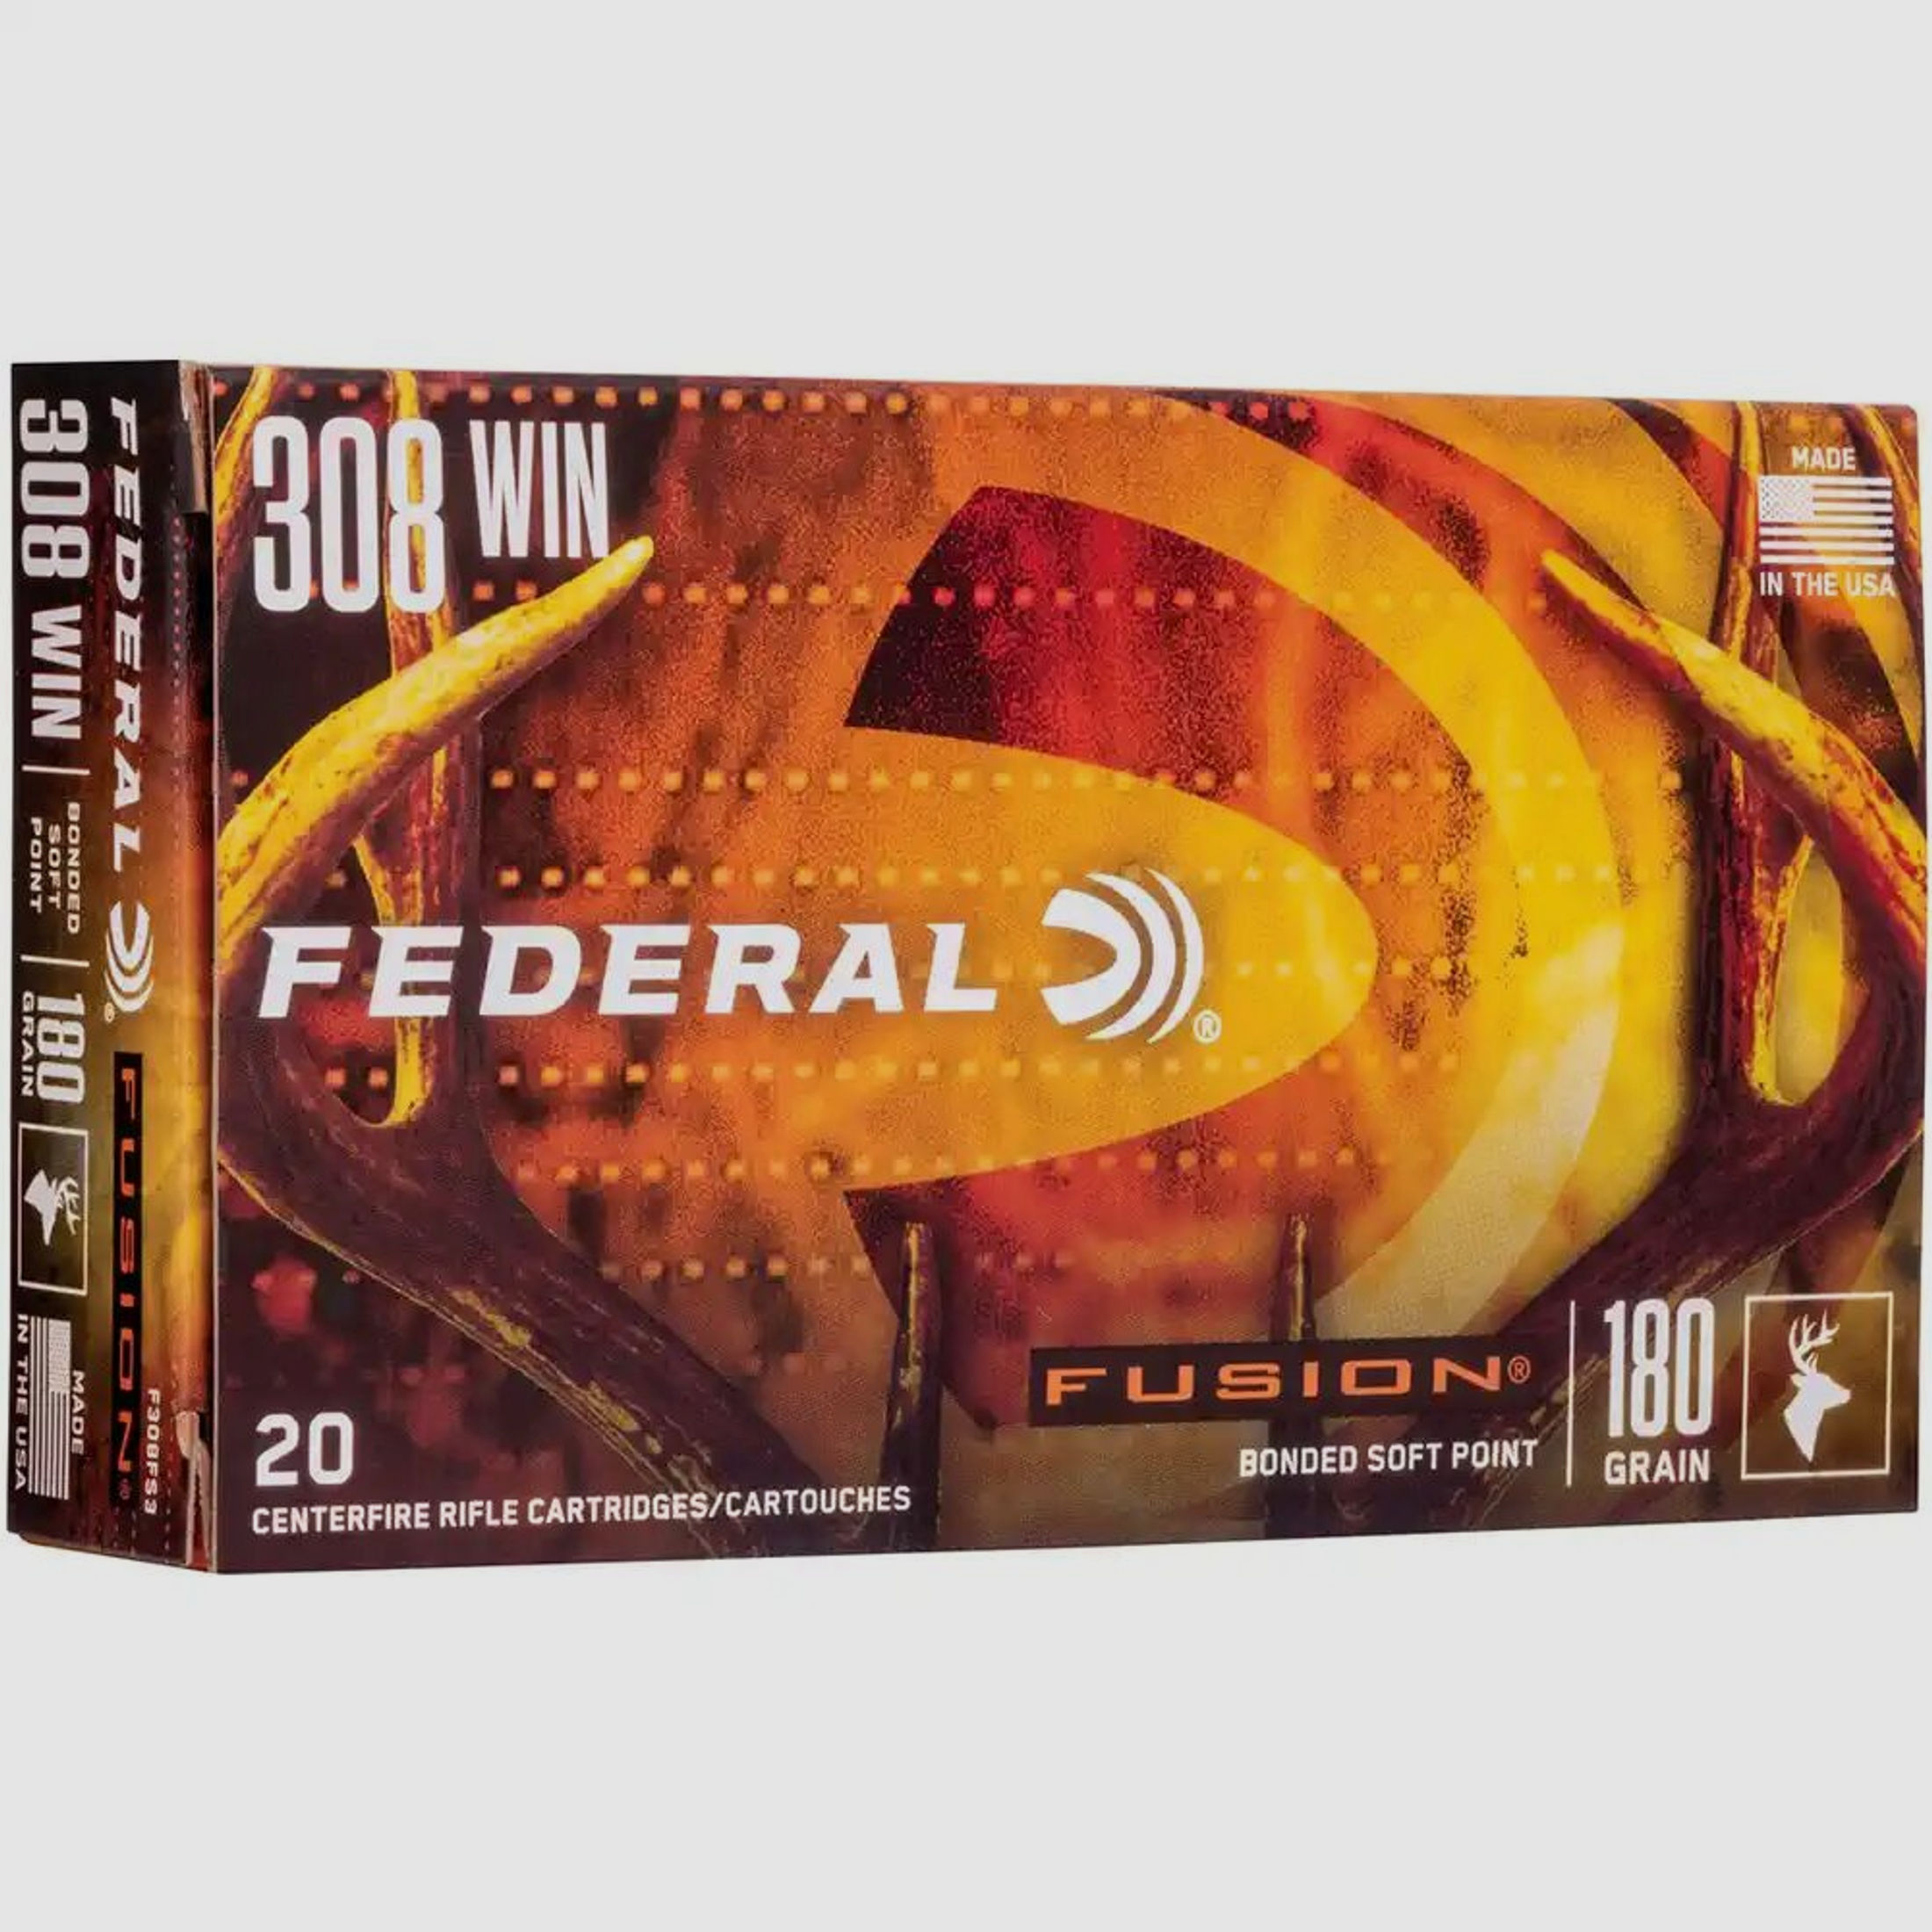 Federal	 .308 Win 180grs Fusion